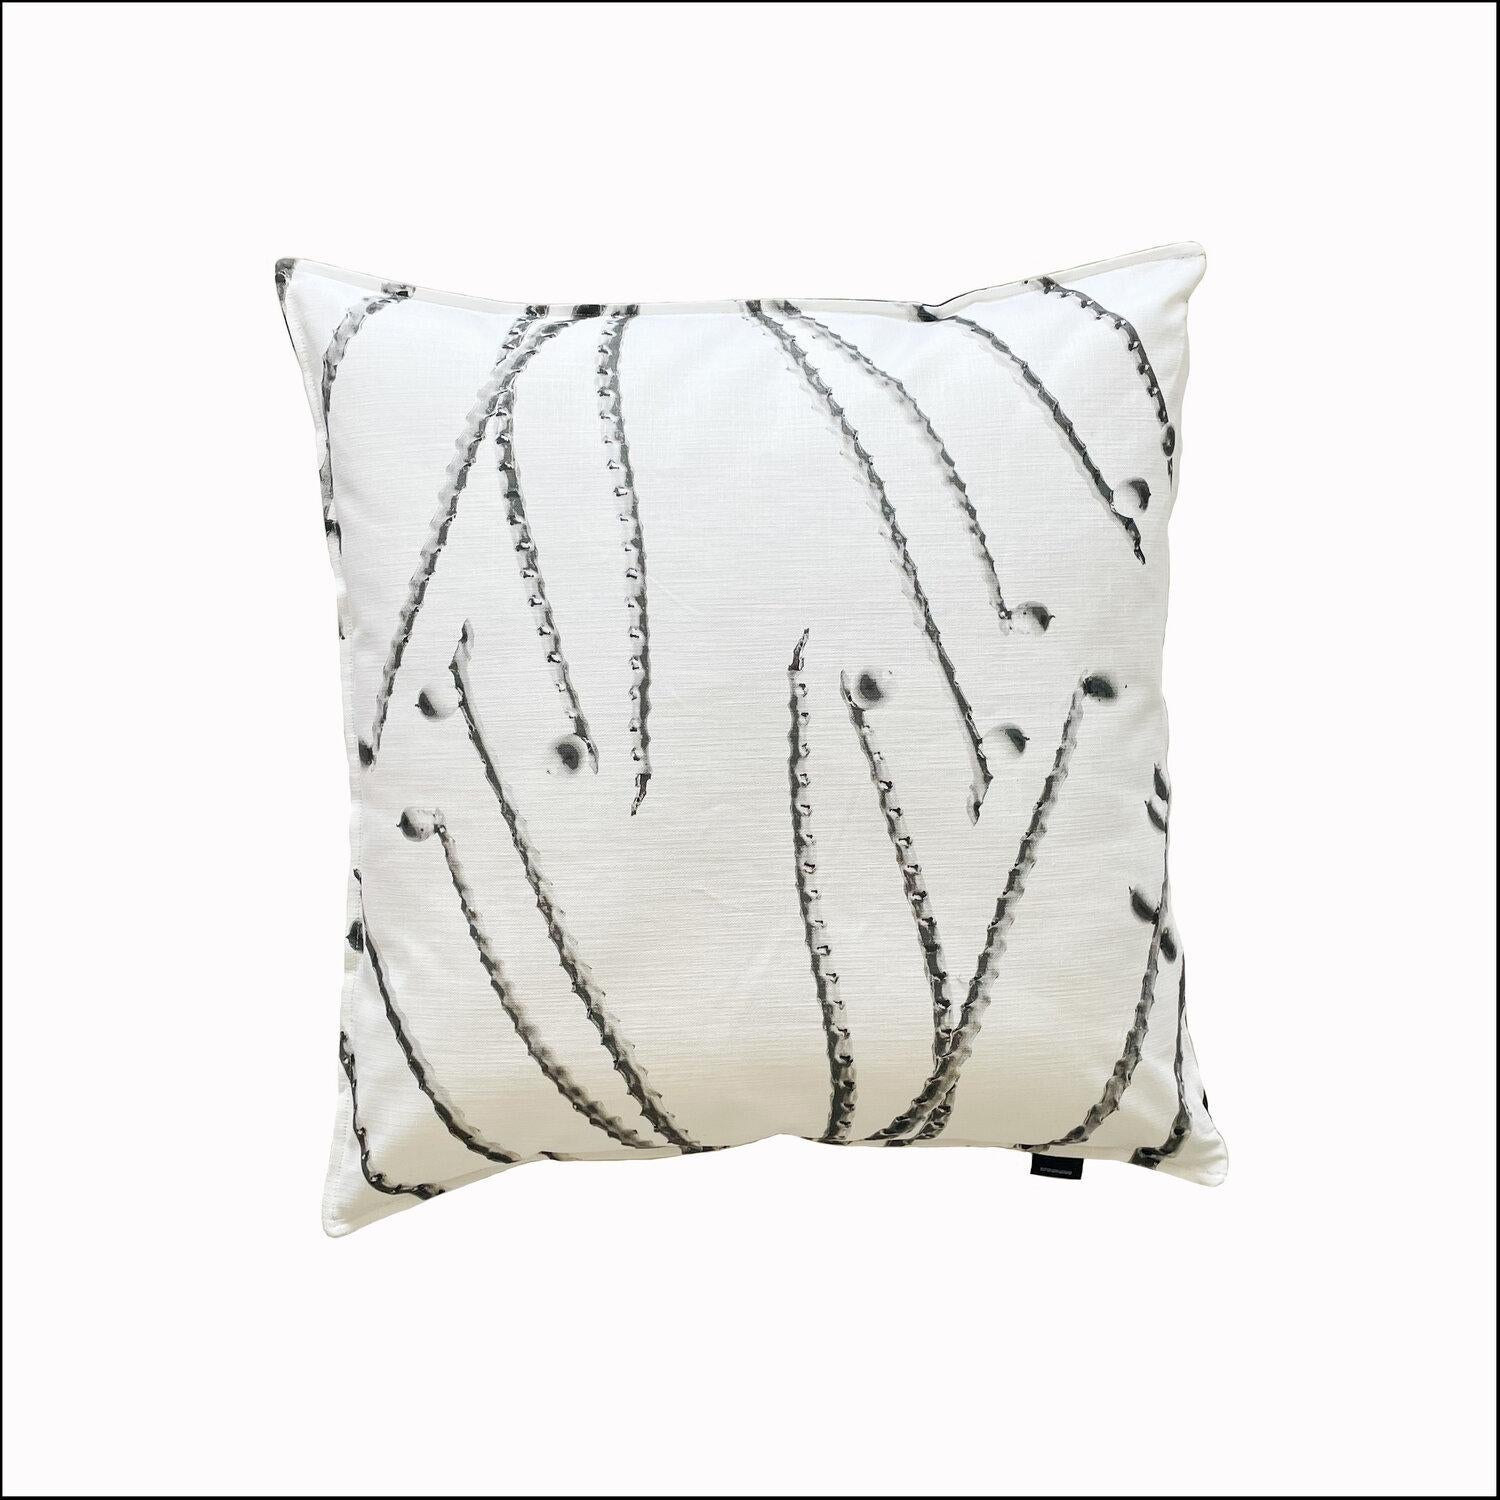 Double-sided black and white monochromatic pillow w/ tropical plant images 24x24 in.

One side has a white background, one side has a black background so this is a pillow you can style various ways.

Bring a touch of the exotic into your home